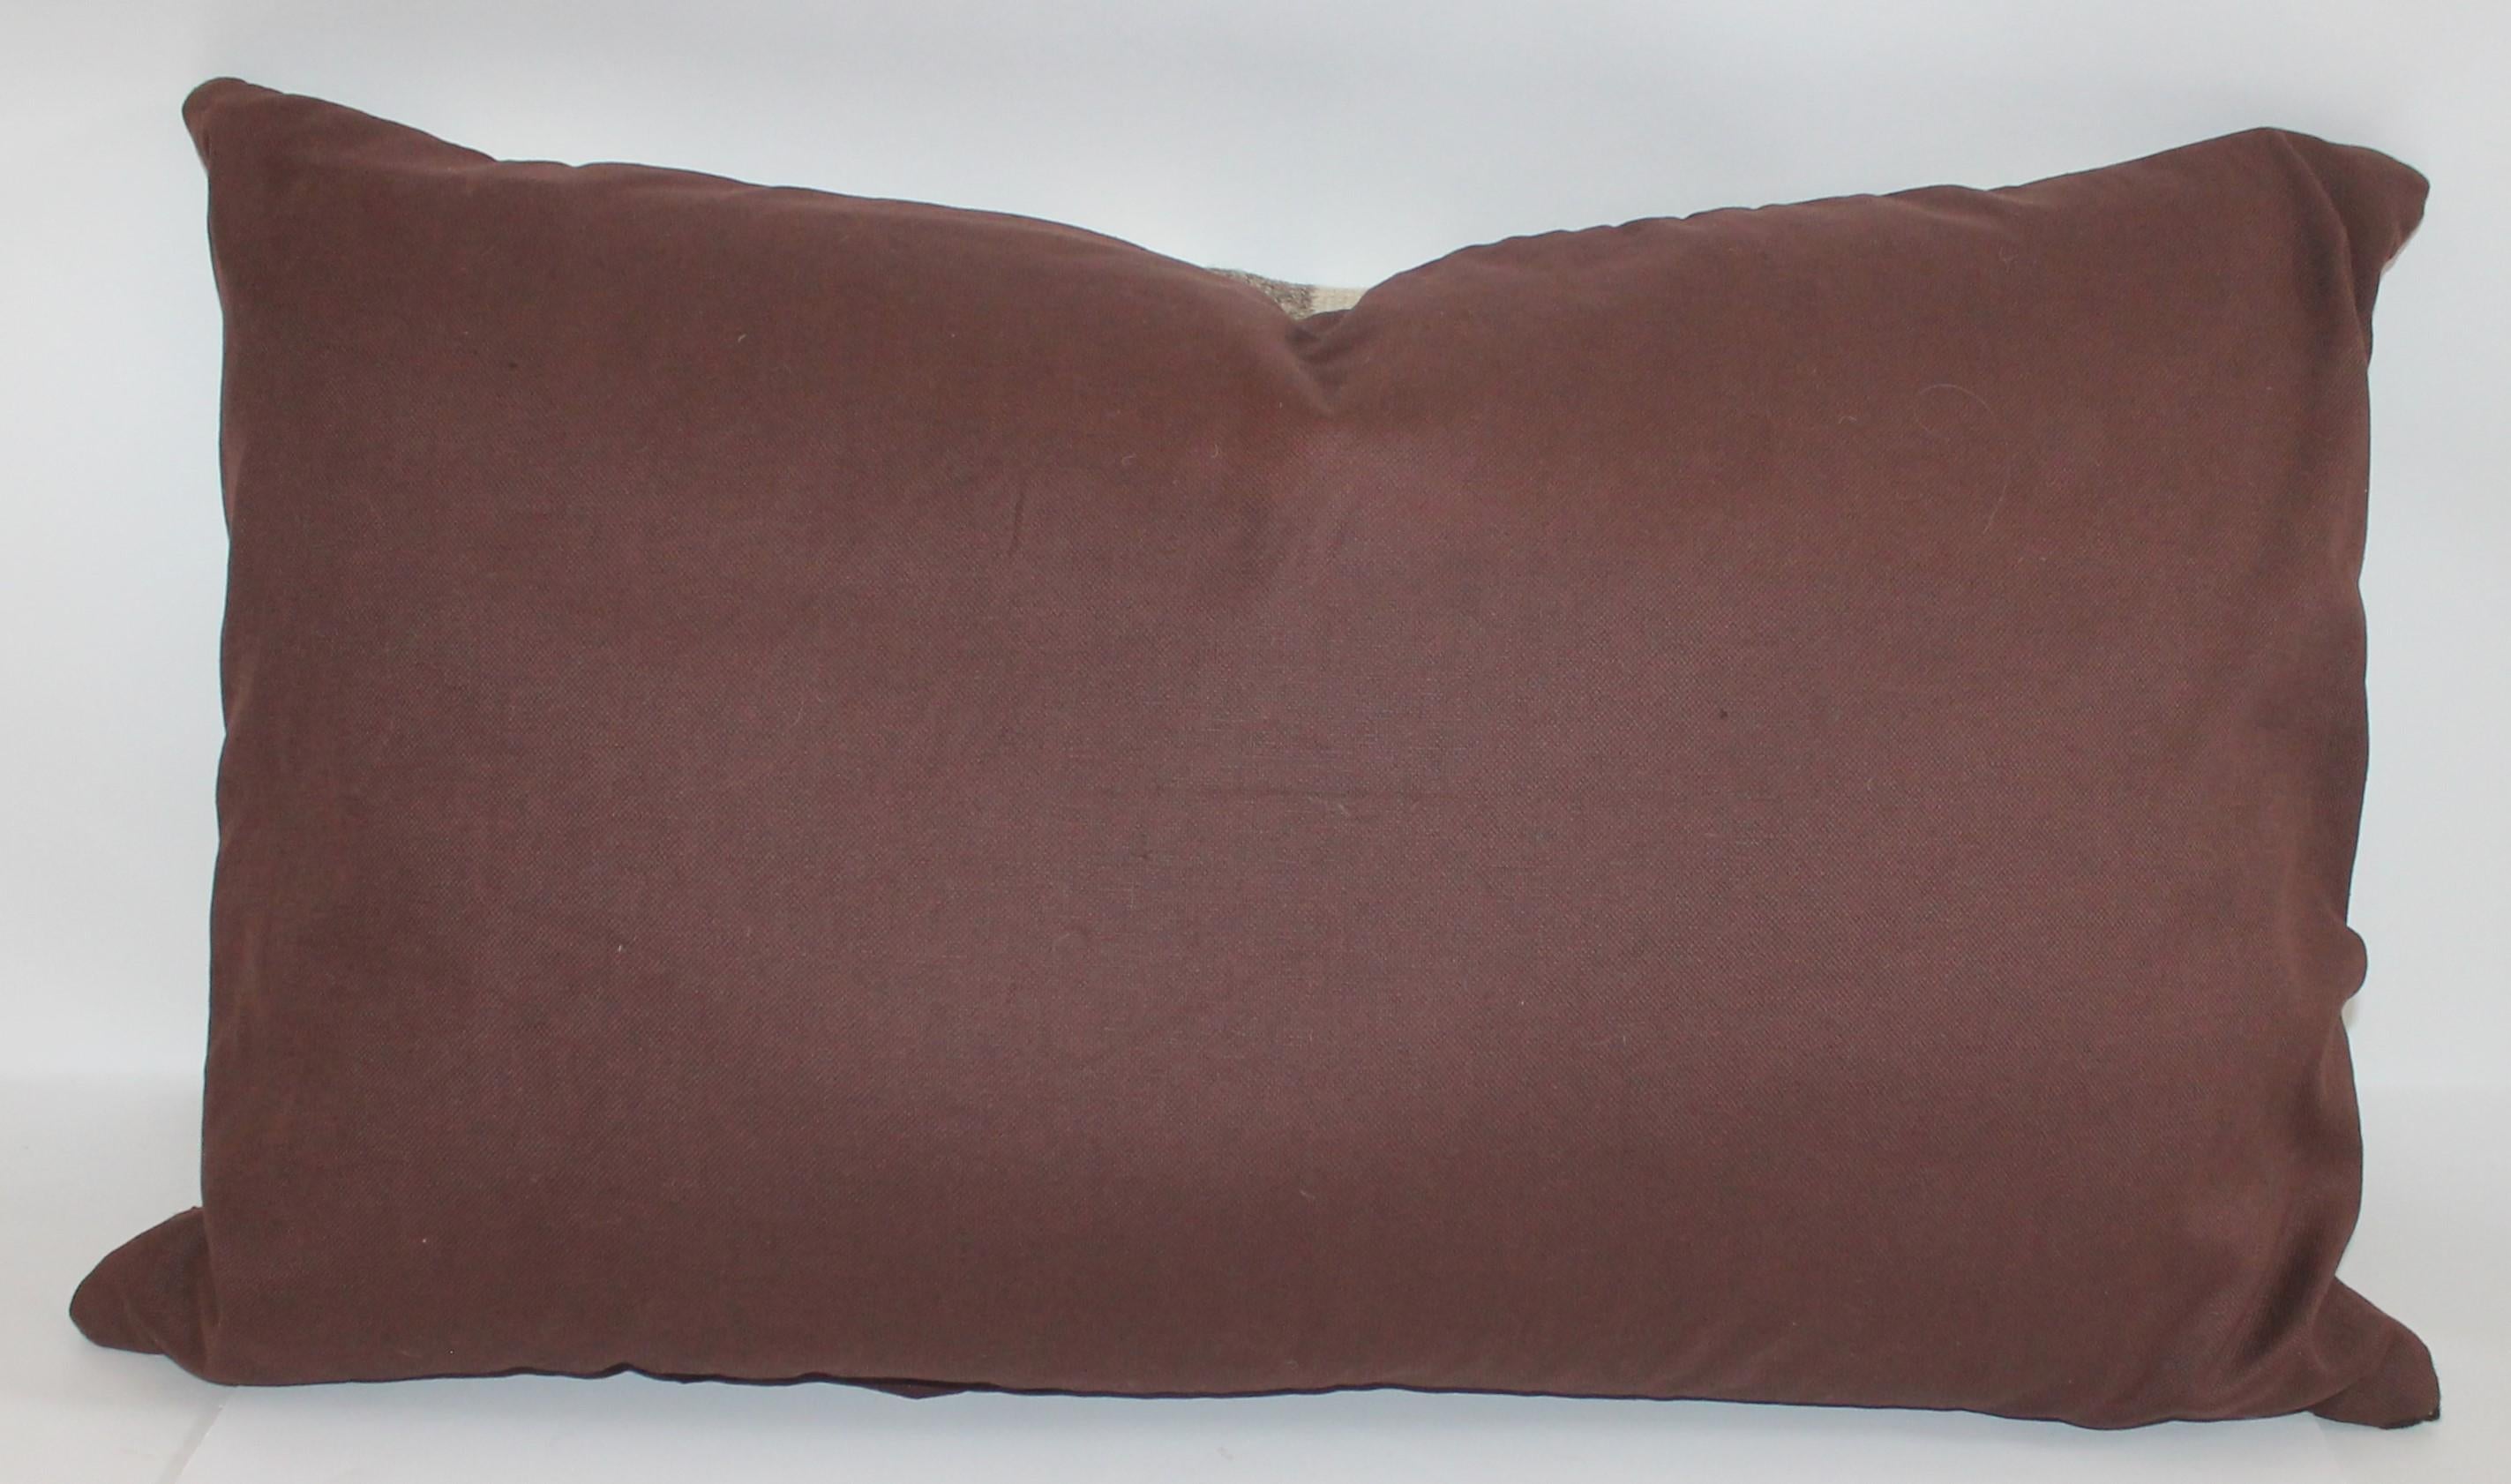 Hand-Woven 19th Century Transitional Navajo Indian Weaving Bolster Pillow